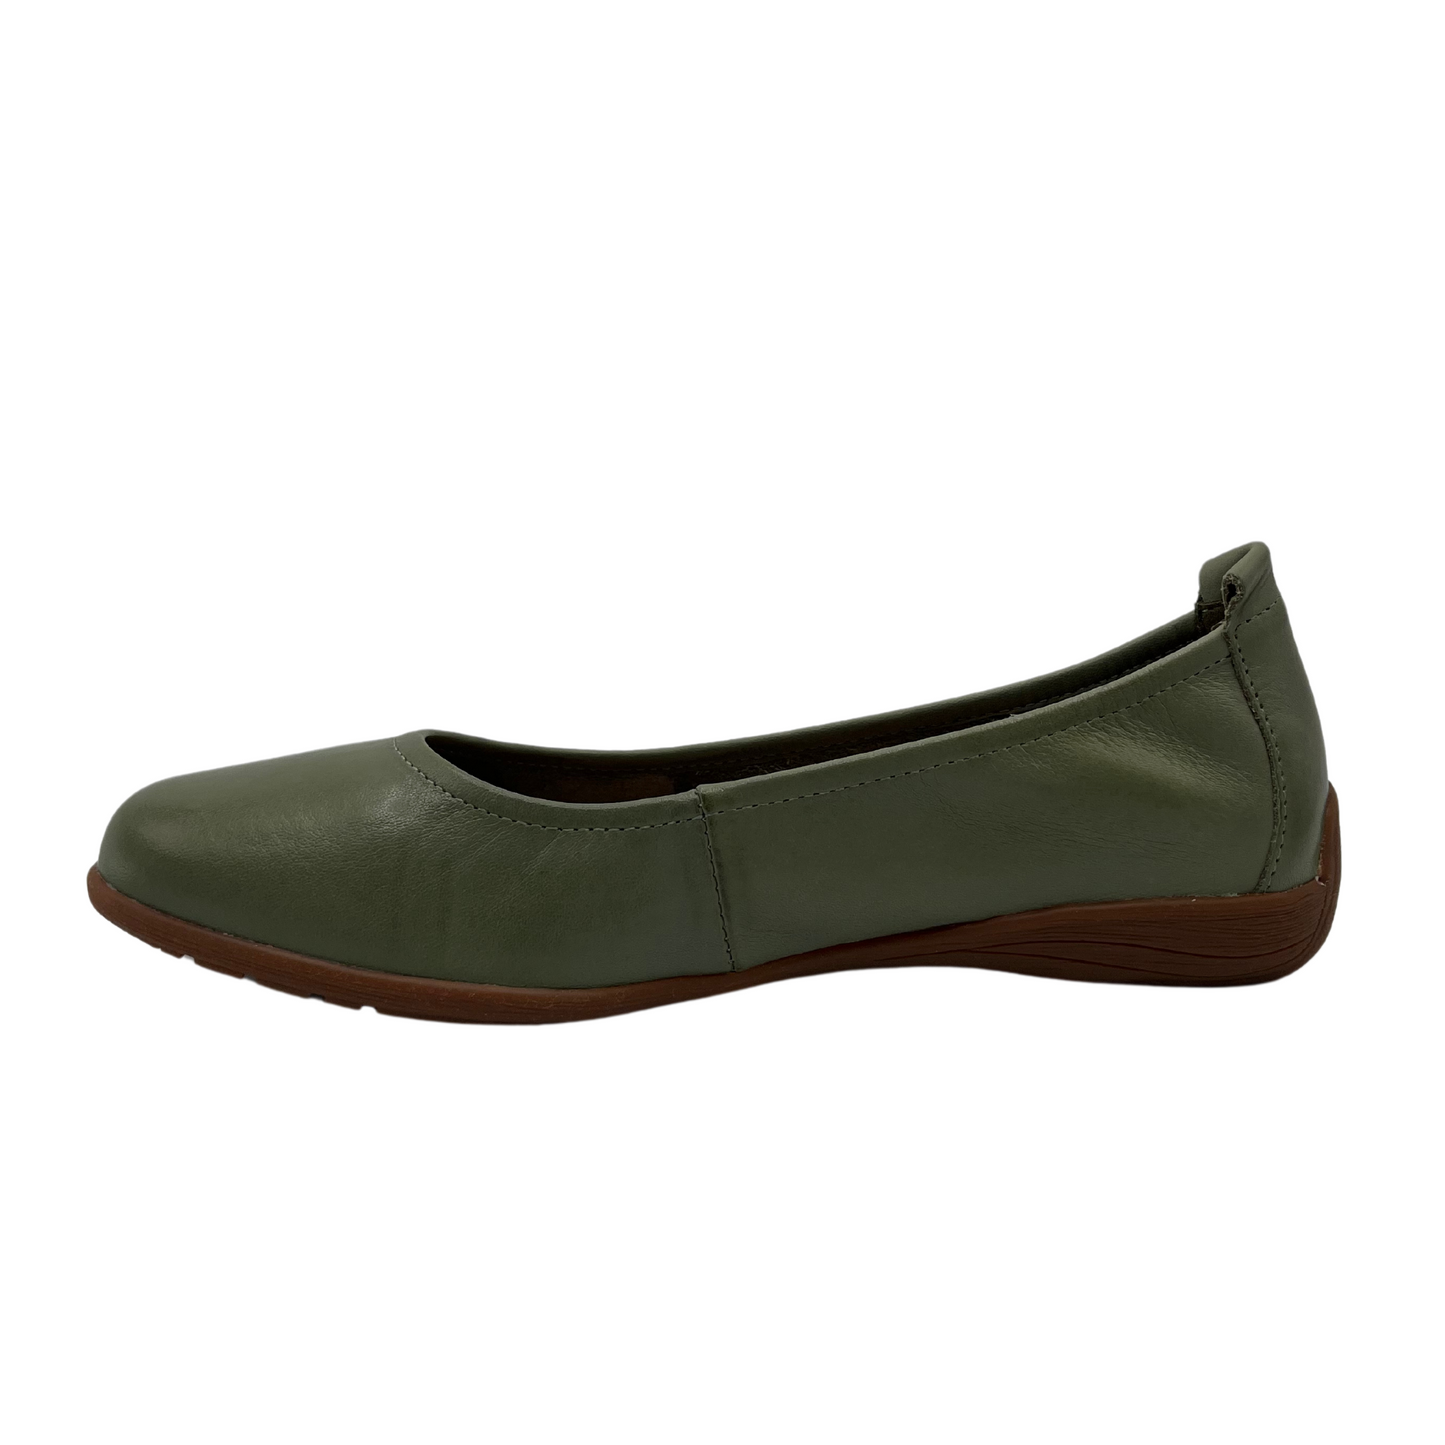 Left facing view of mint leather ballet flat with brown rubber outsole